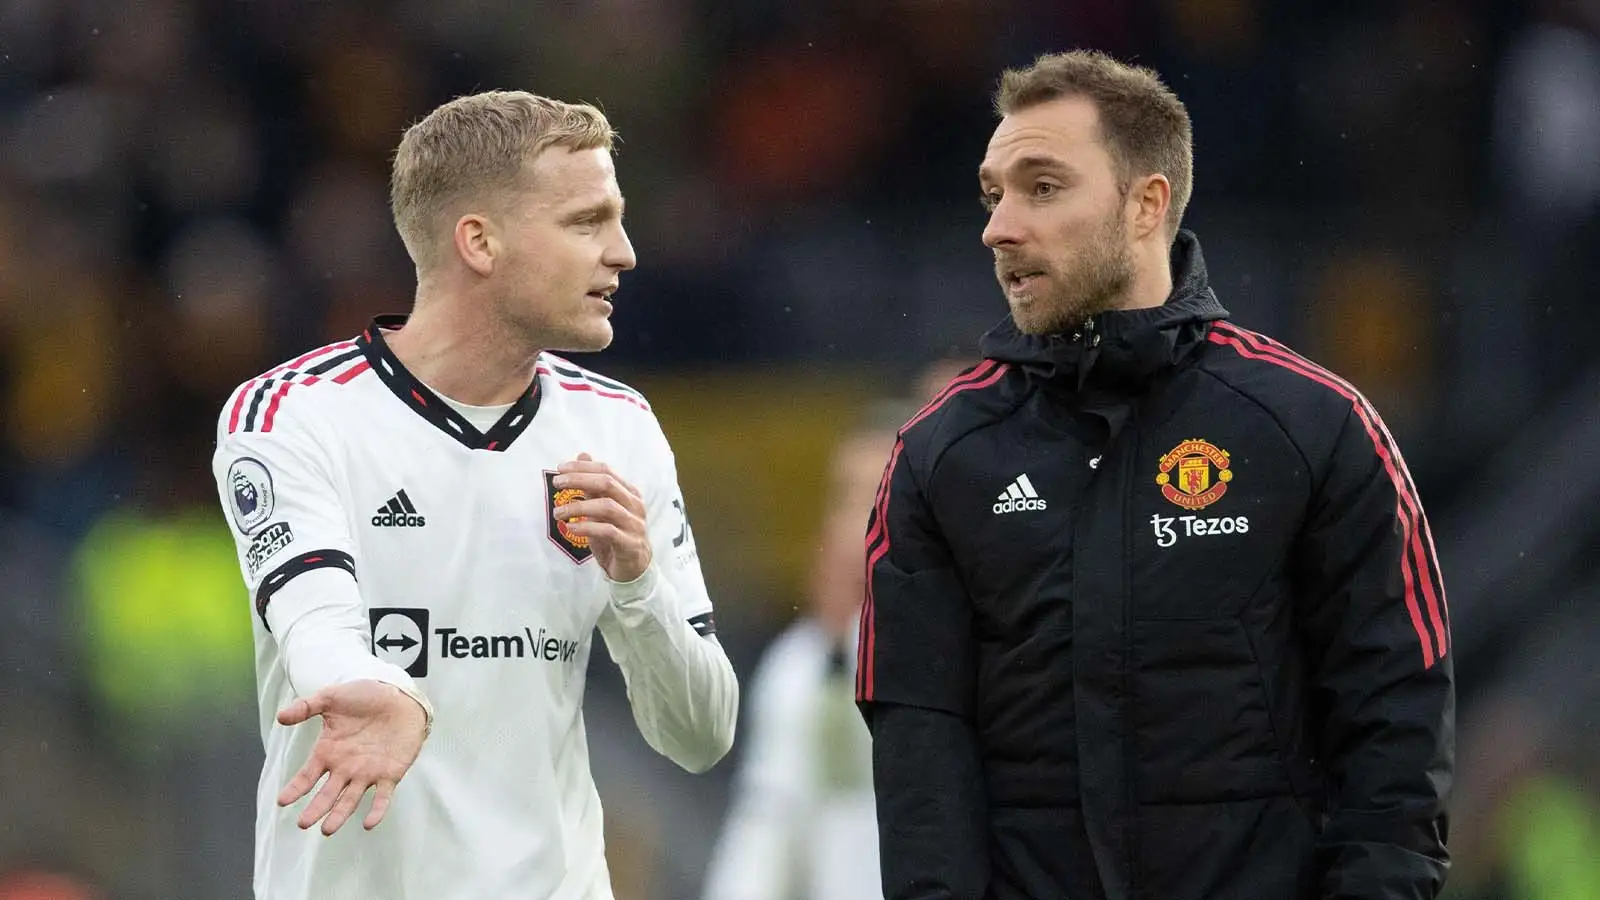 Manchester United's Donny van de Beek and Manchester United's Christian Eriksen after the game the Premier League match between Wolverhampton Wanderers and Manchester United